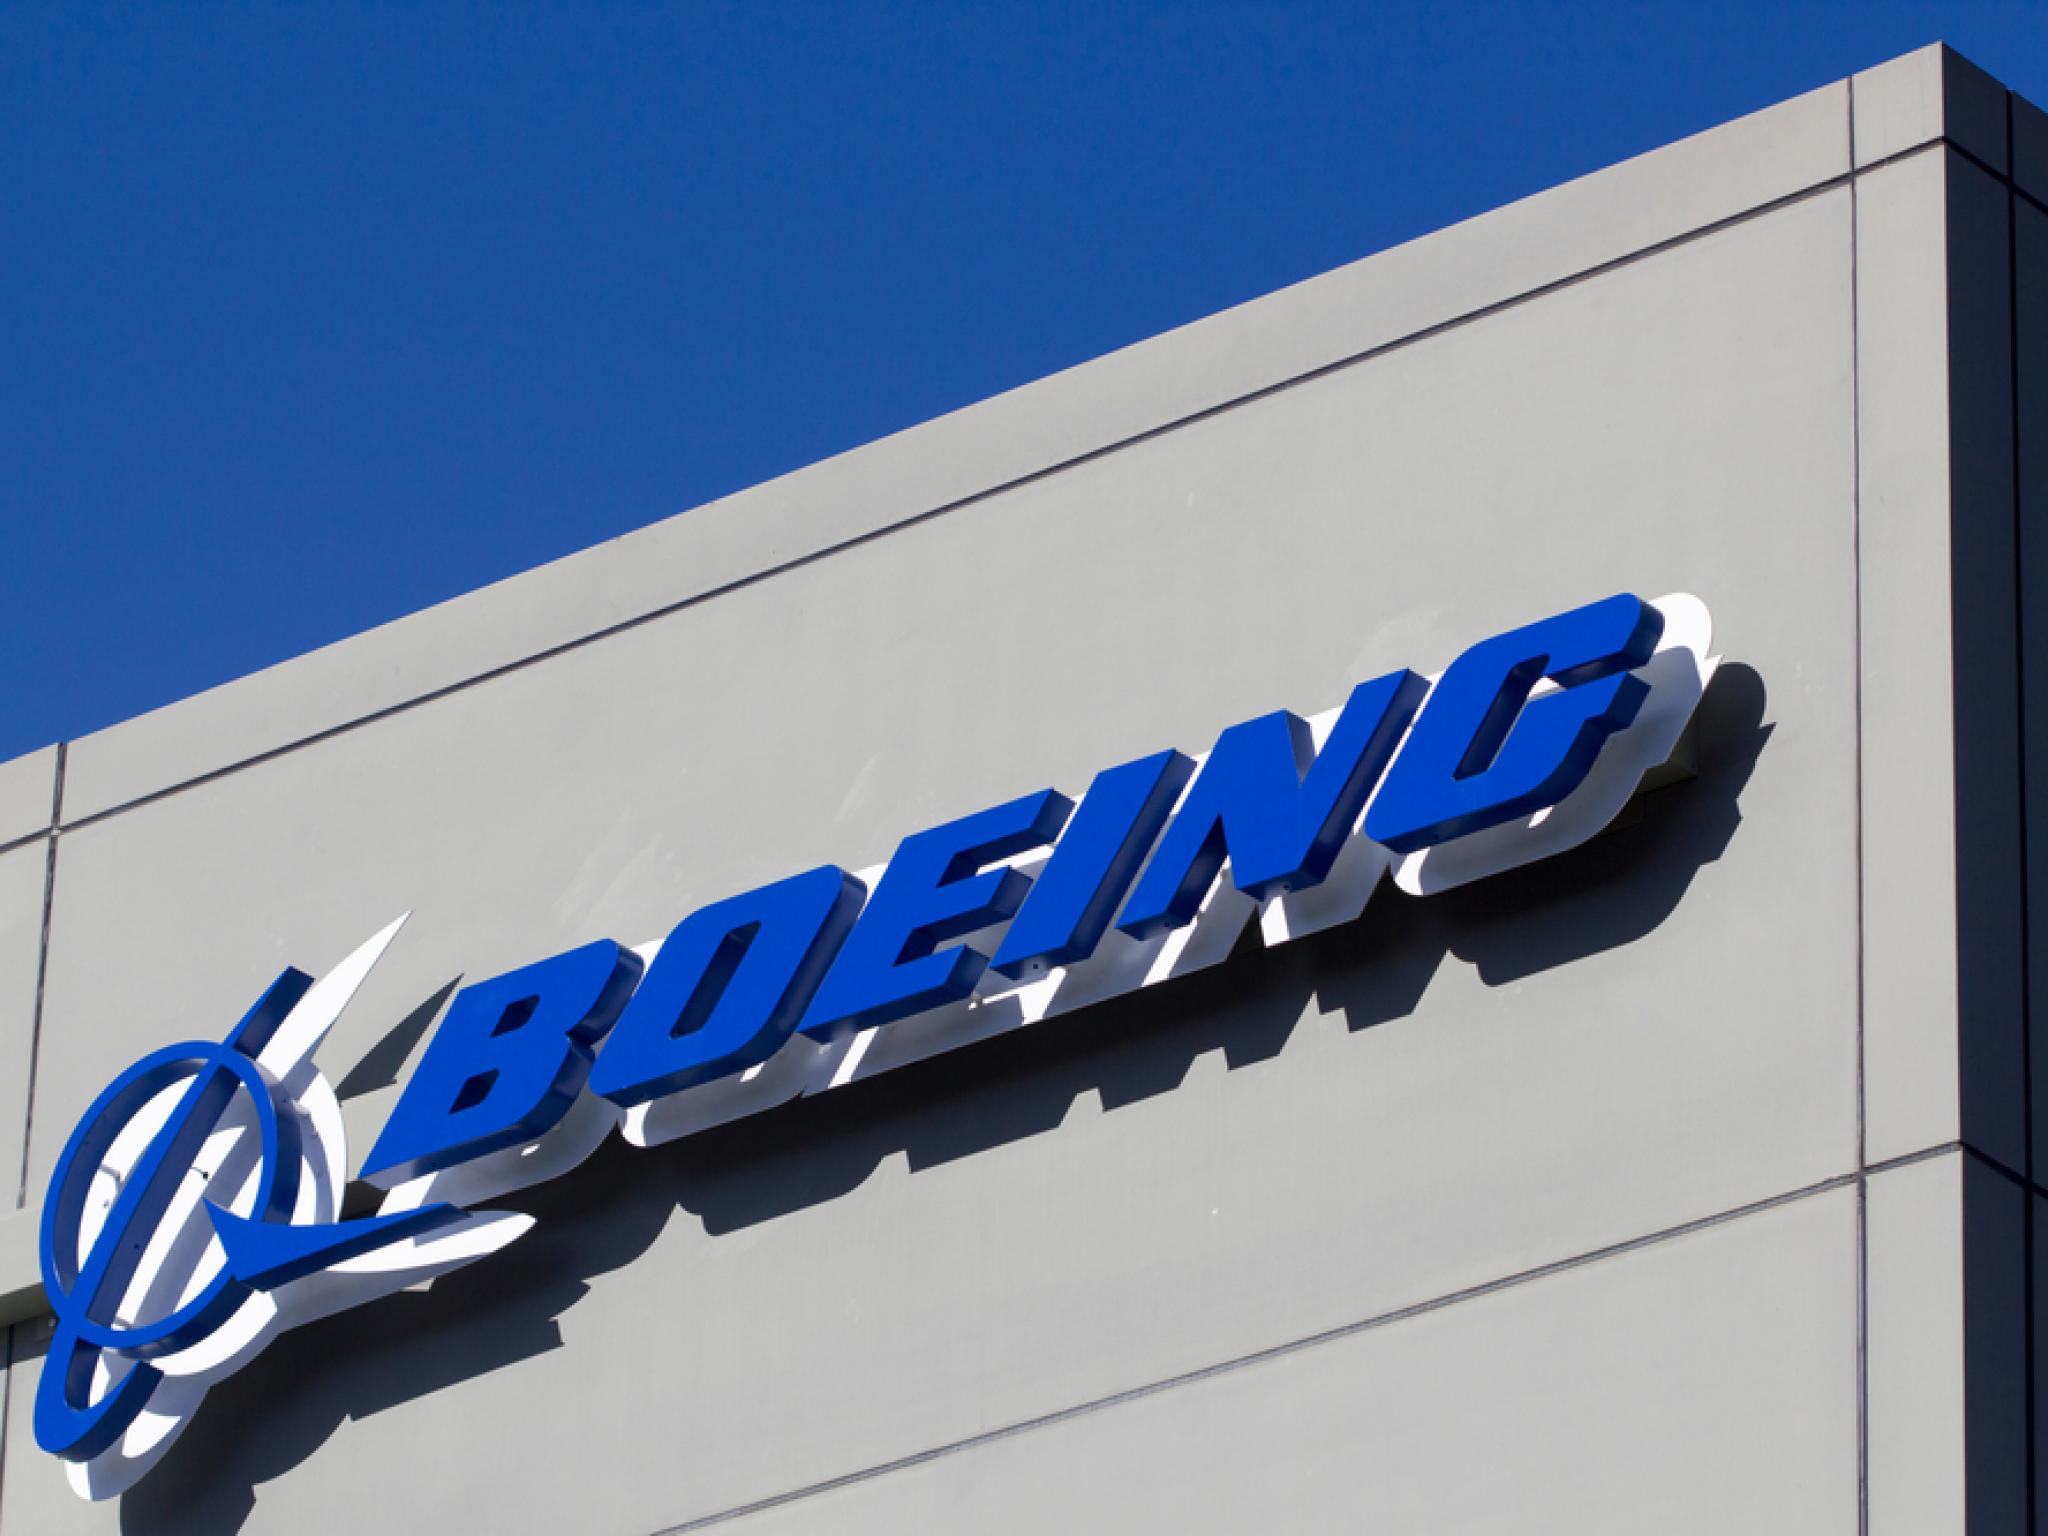  boeing-faces-delivery-downturn-but-analyst-sees-bright-spots-in-orders 